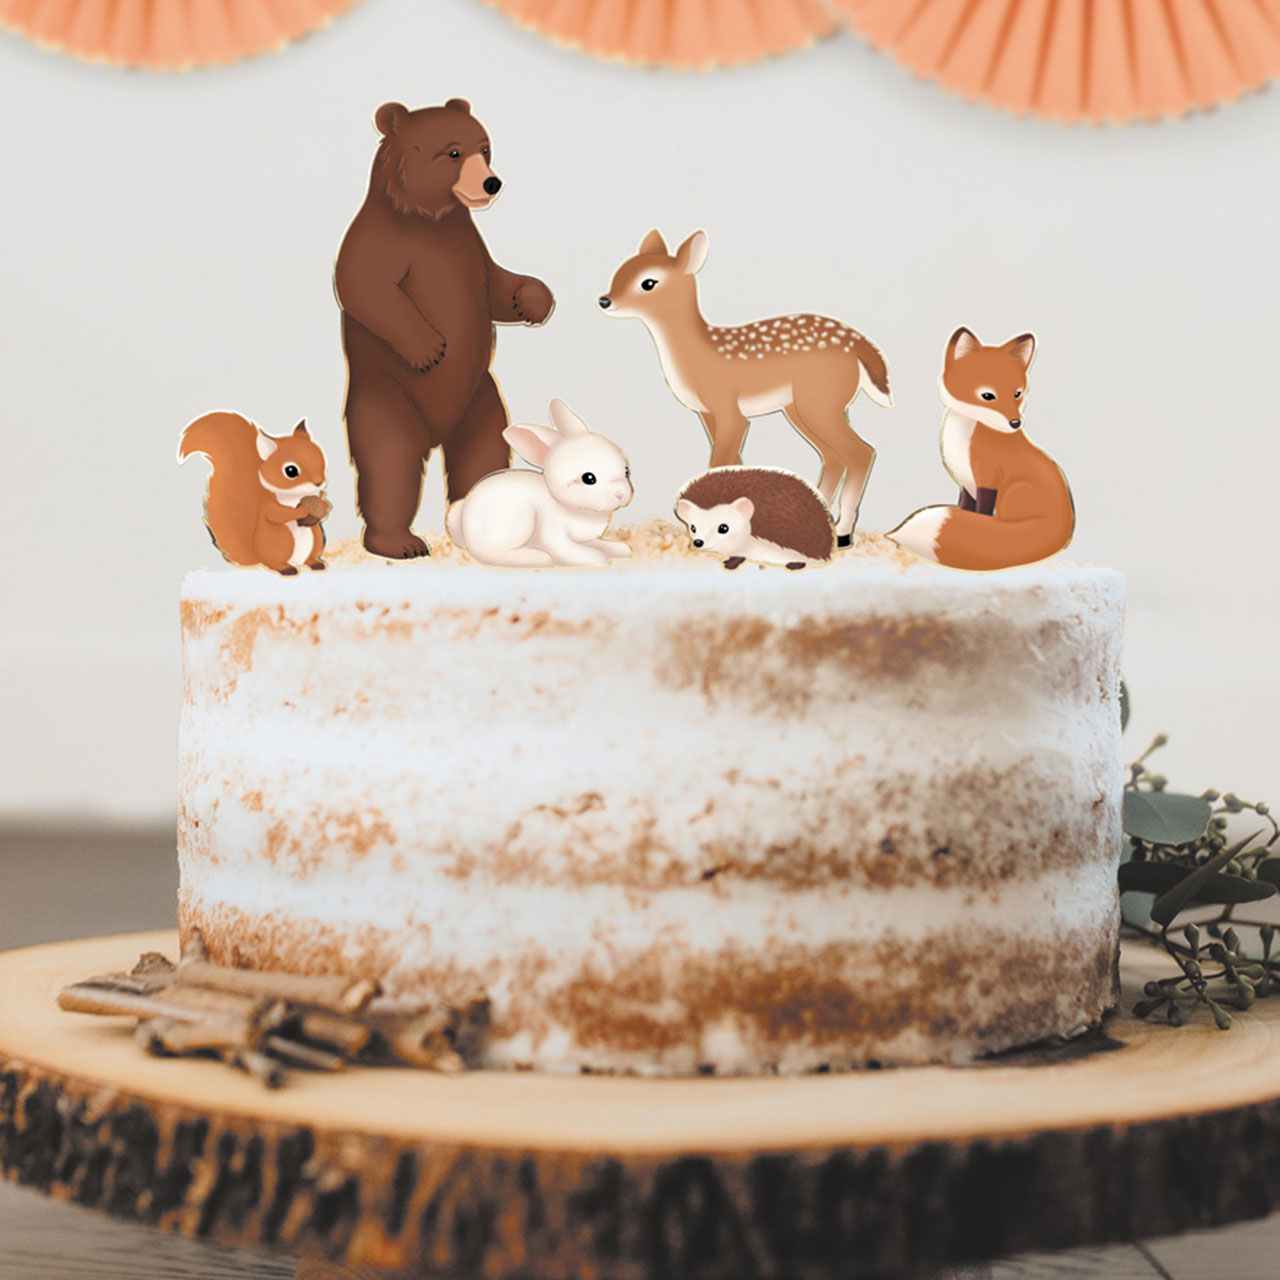 Cake Toppers - Woodland